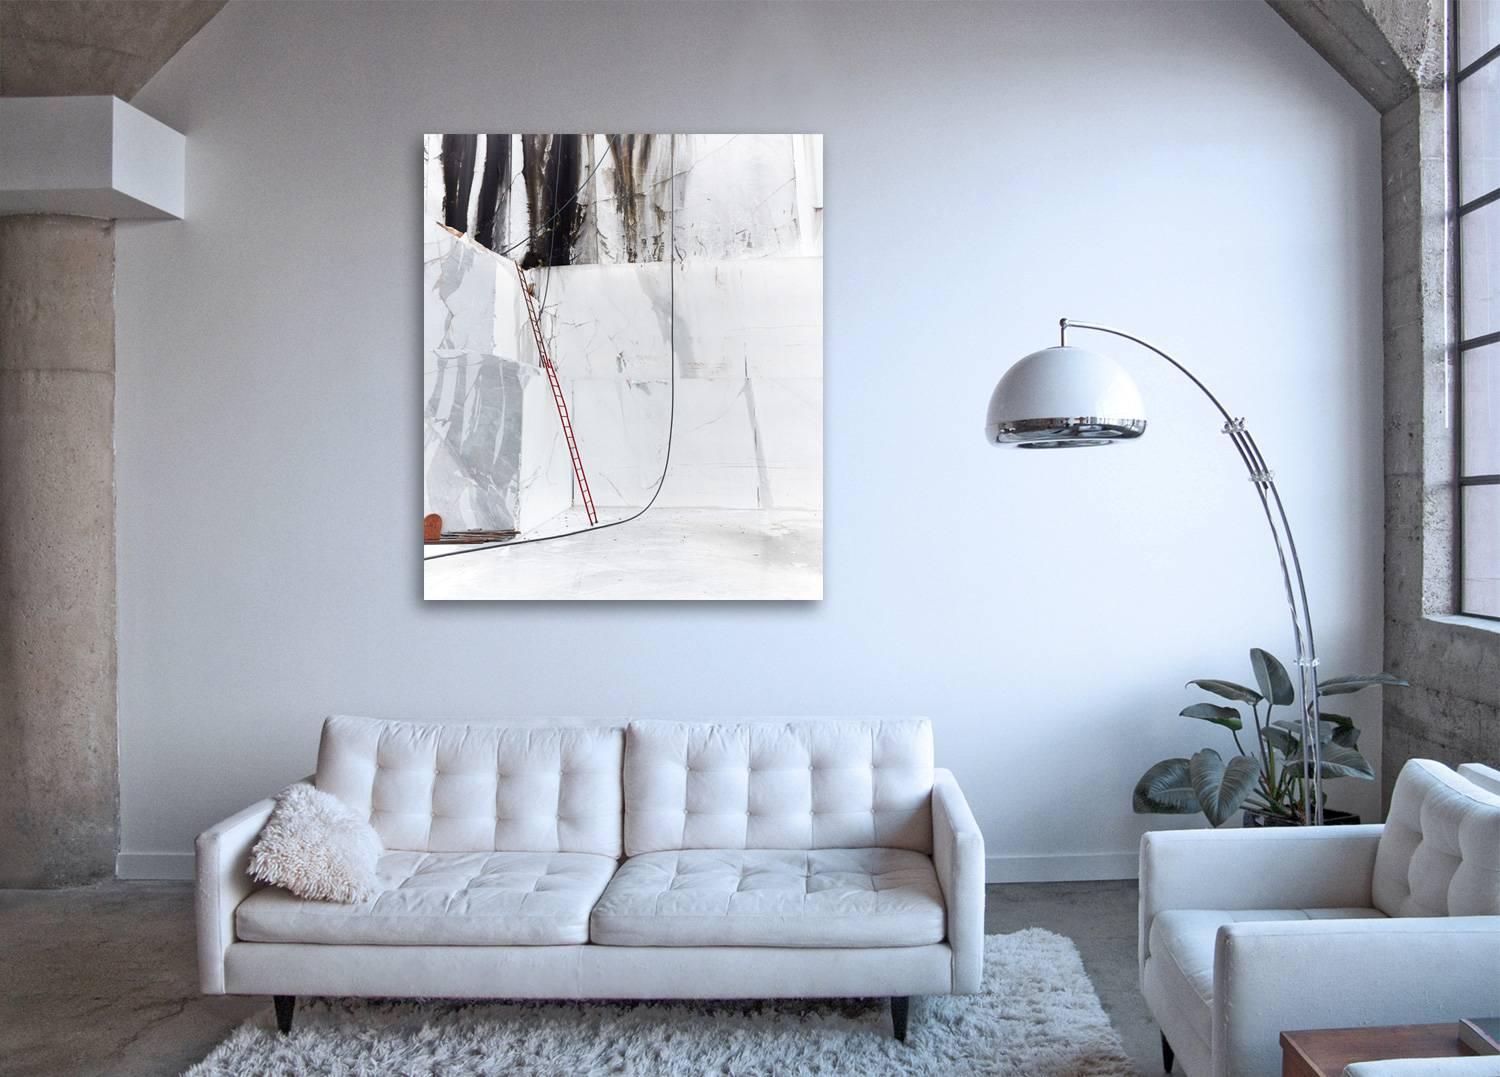 Carrara II (framed) - large format photograph of iconic Italian marble quarry - Photograph by Frank Schott